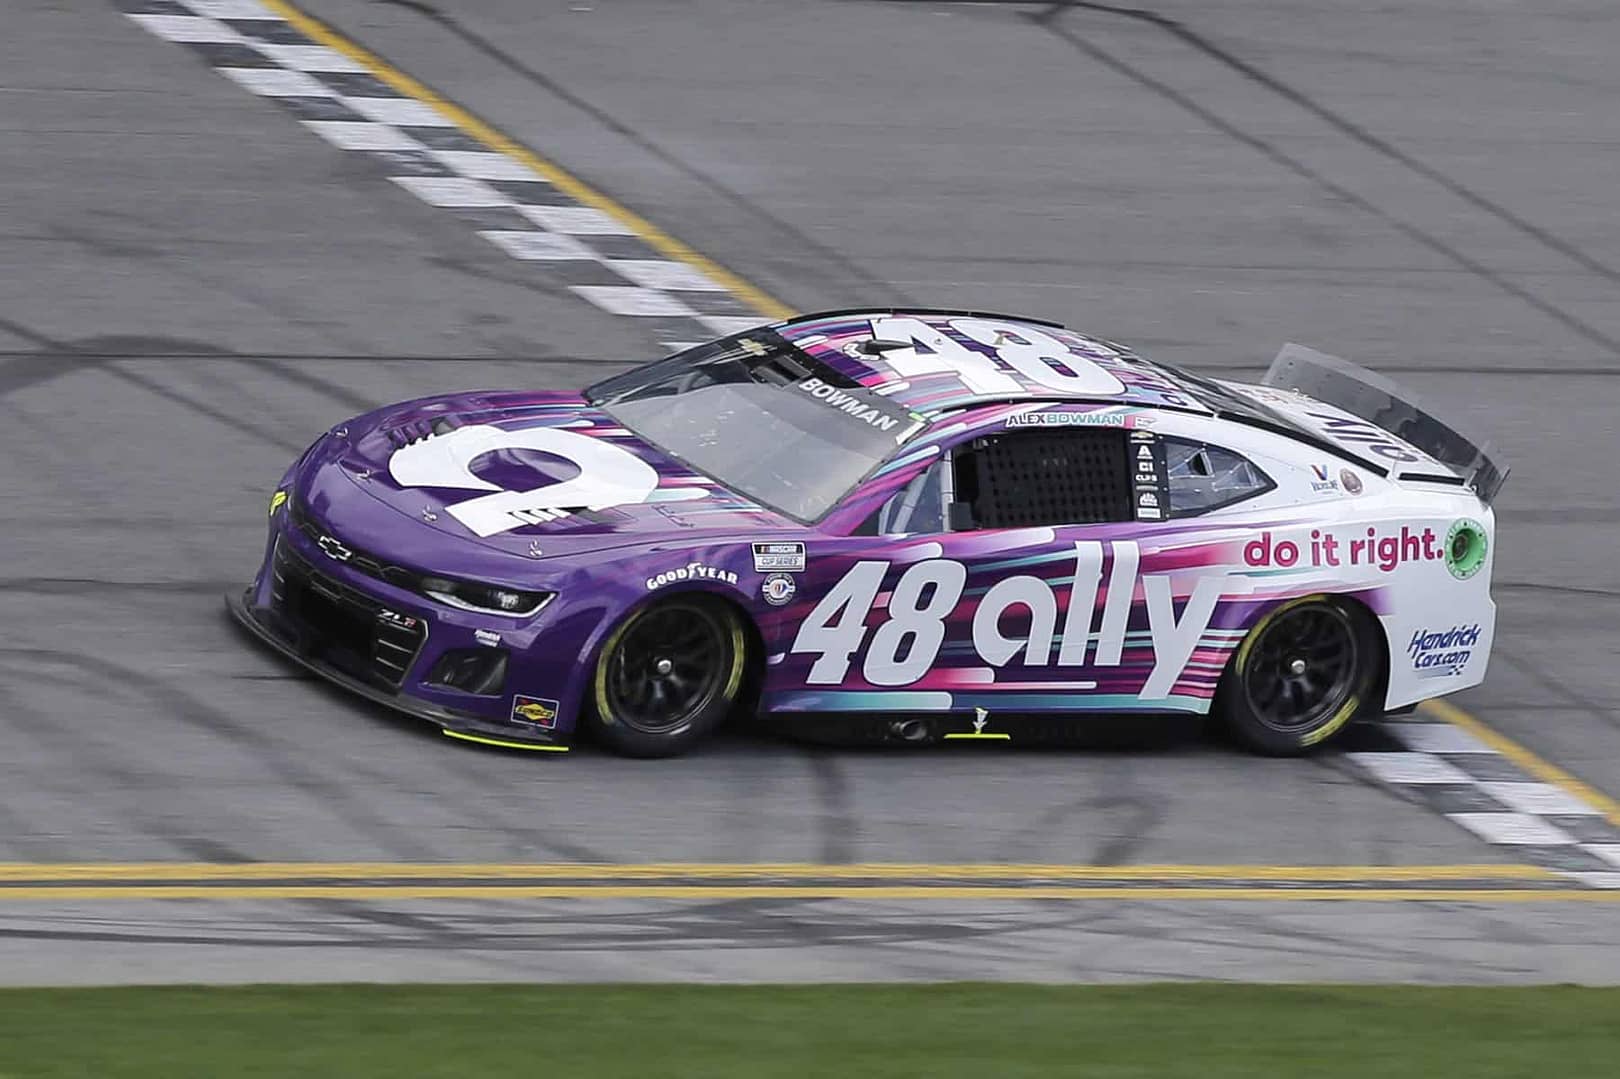 NASCAR's Crayon 301 runs on Sunday. Our expert breaks down the best NASCAR matchup and prop bets for New Hampshire, including...